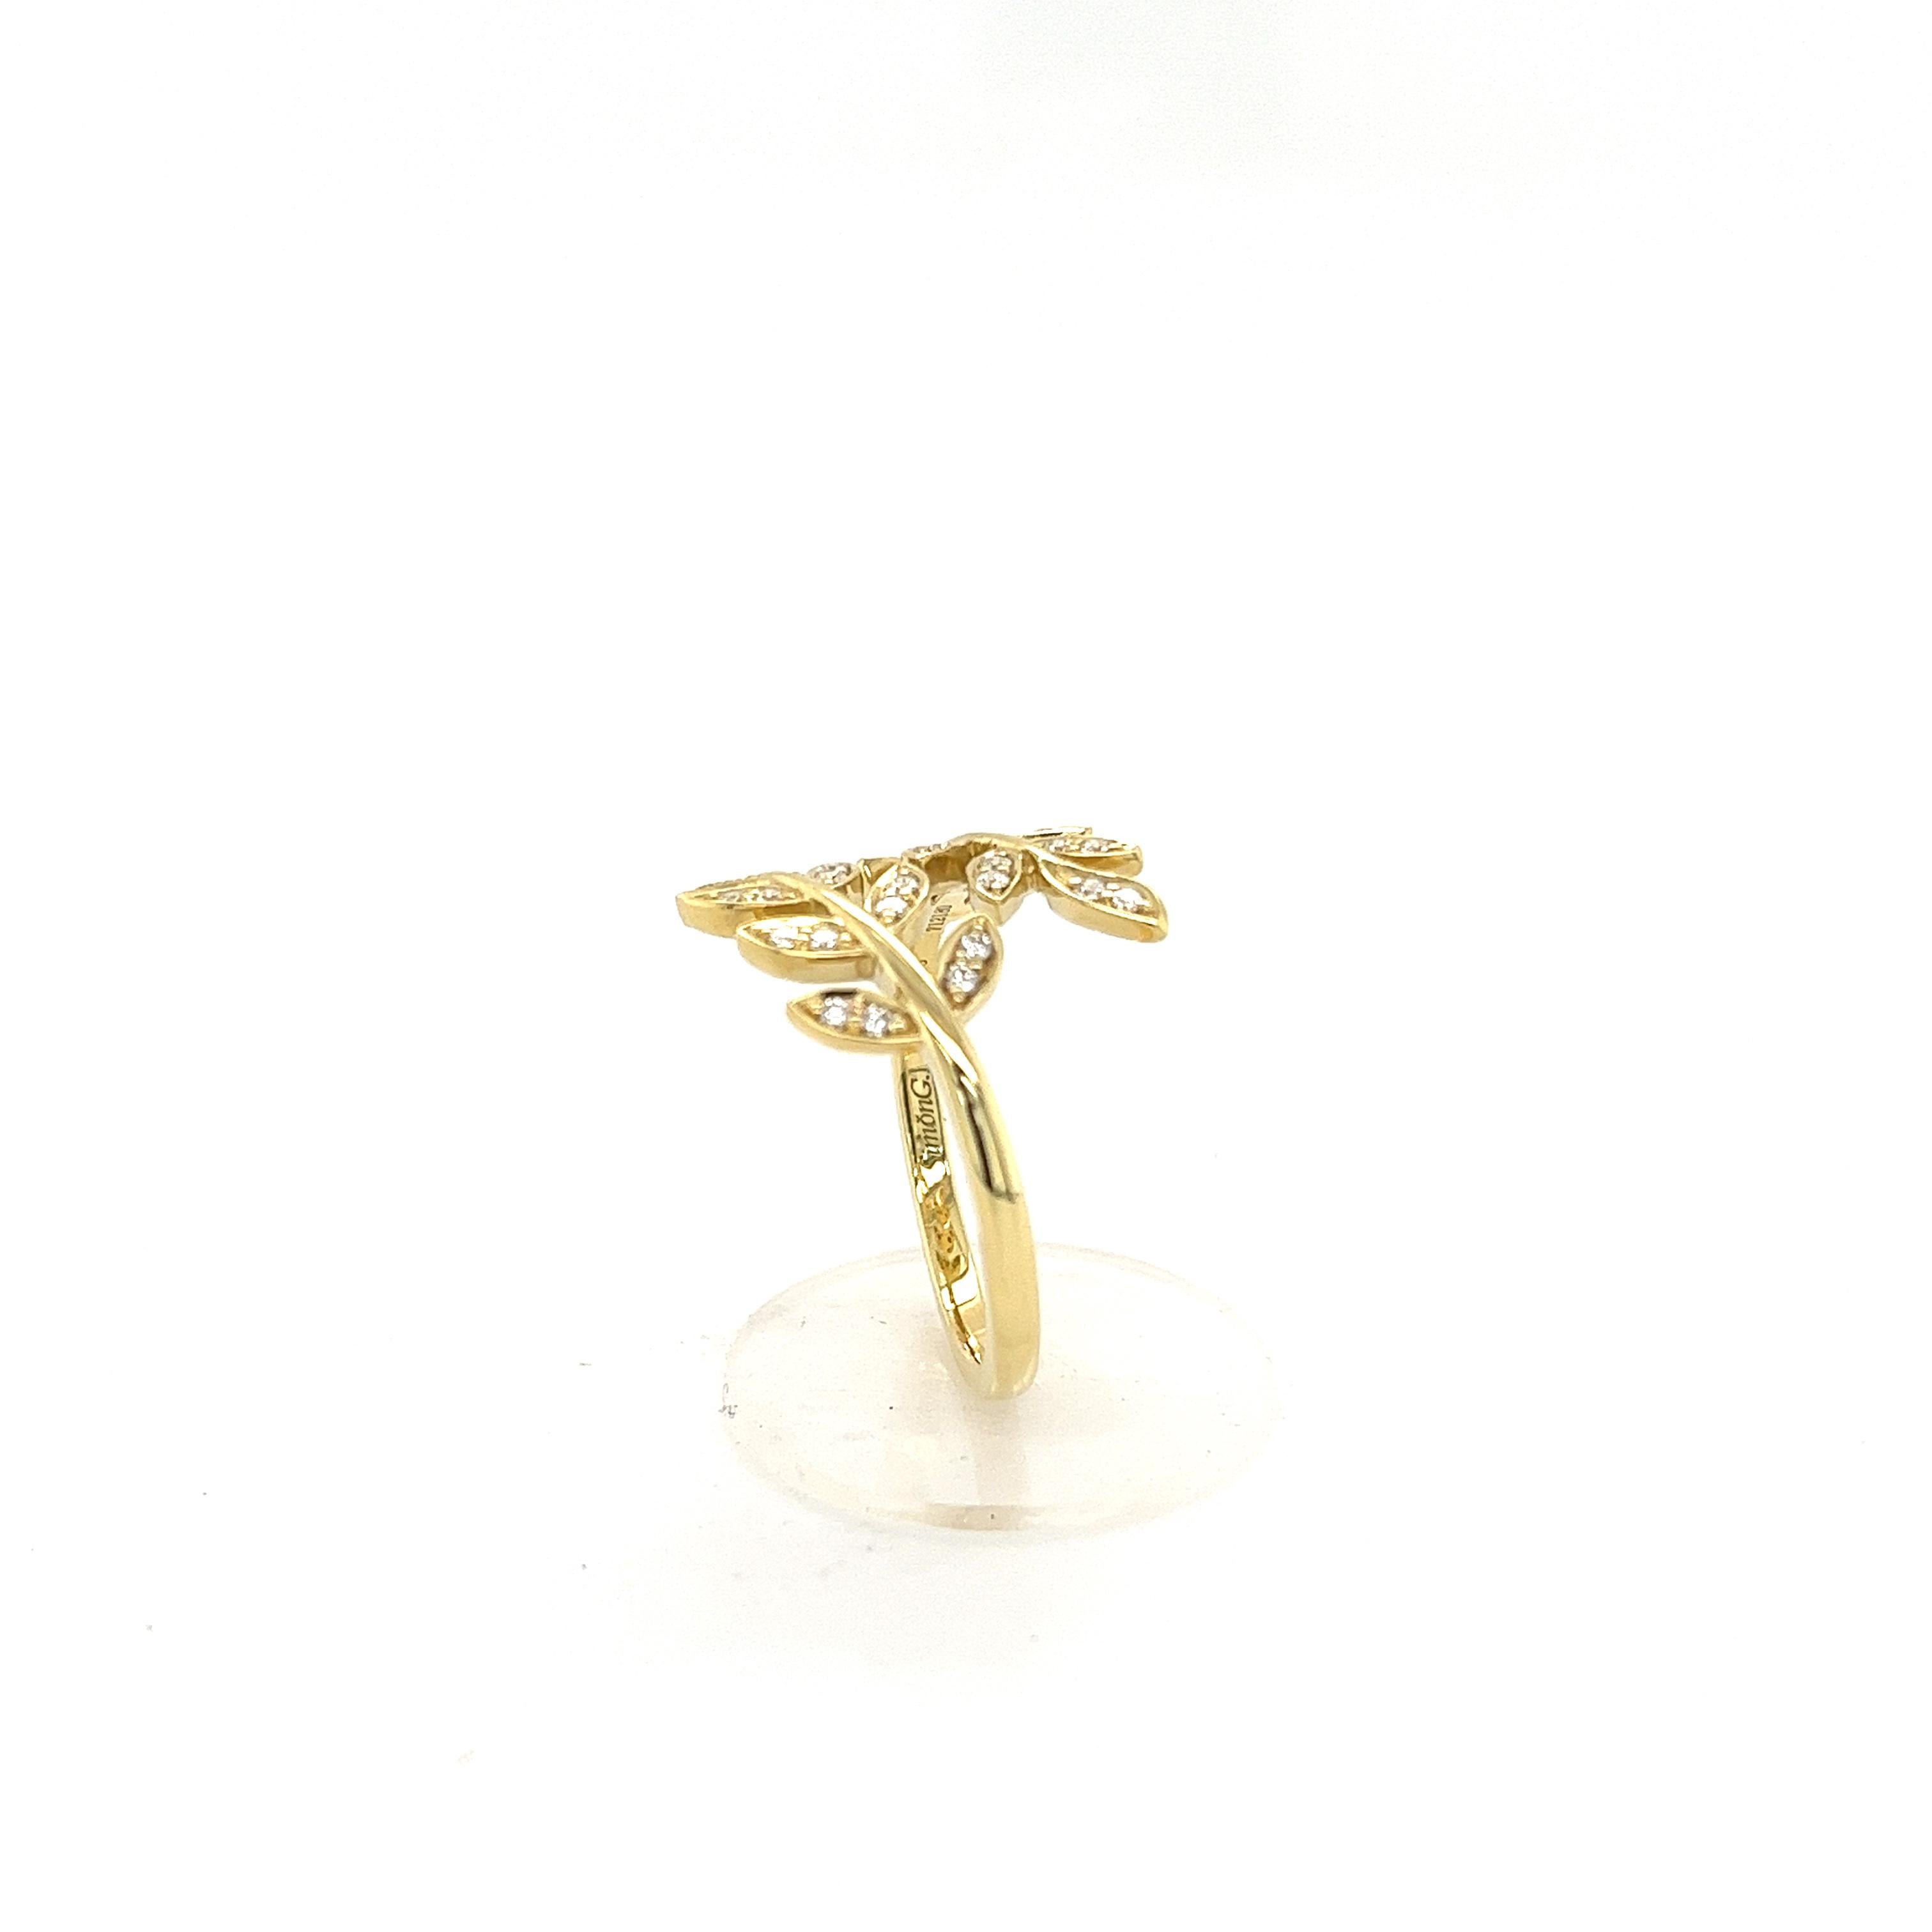 Simon G 18K Yellow Gold and Diamonds Open Style Ring Inspired by Nature For Sale 1